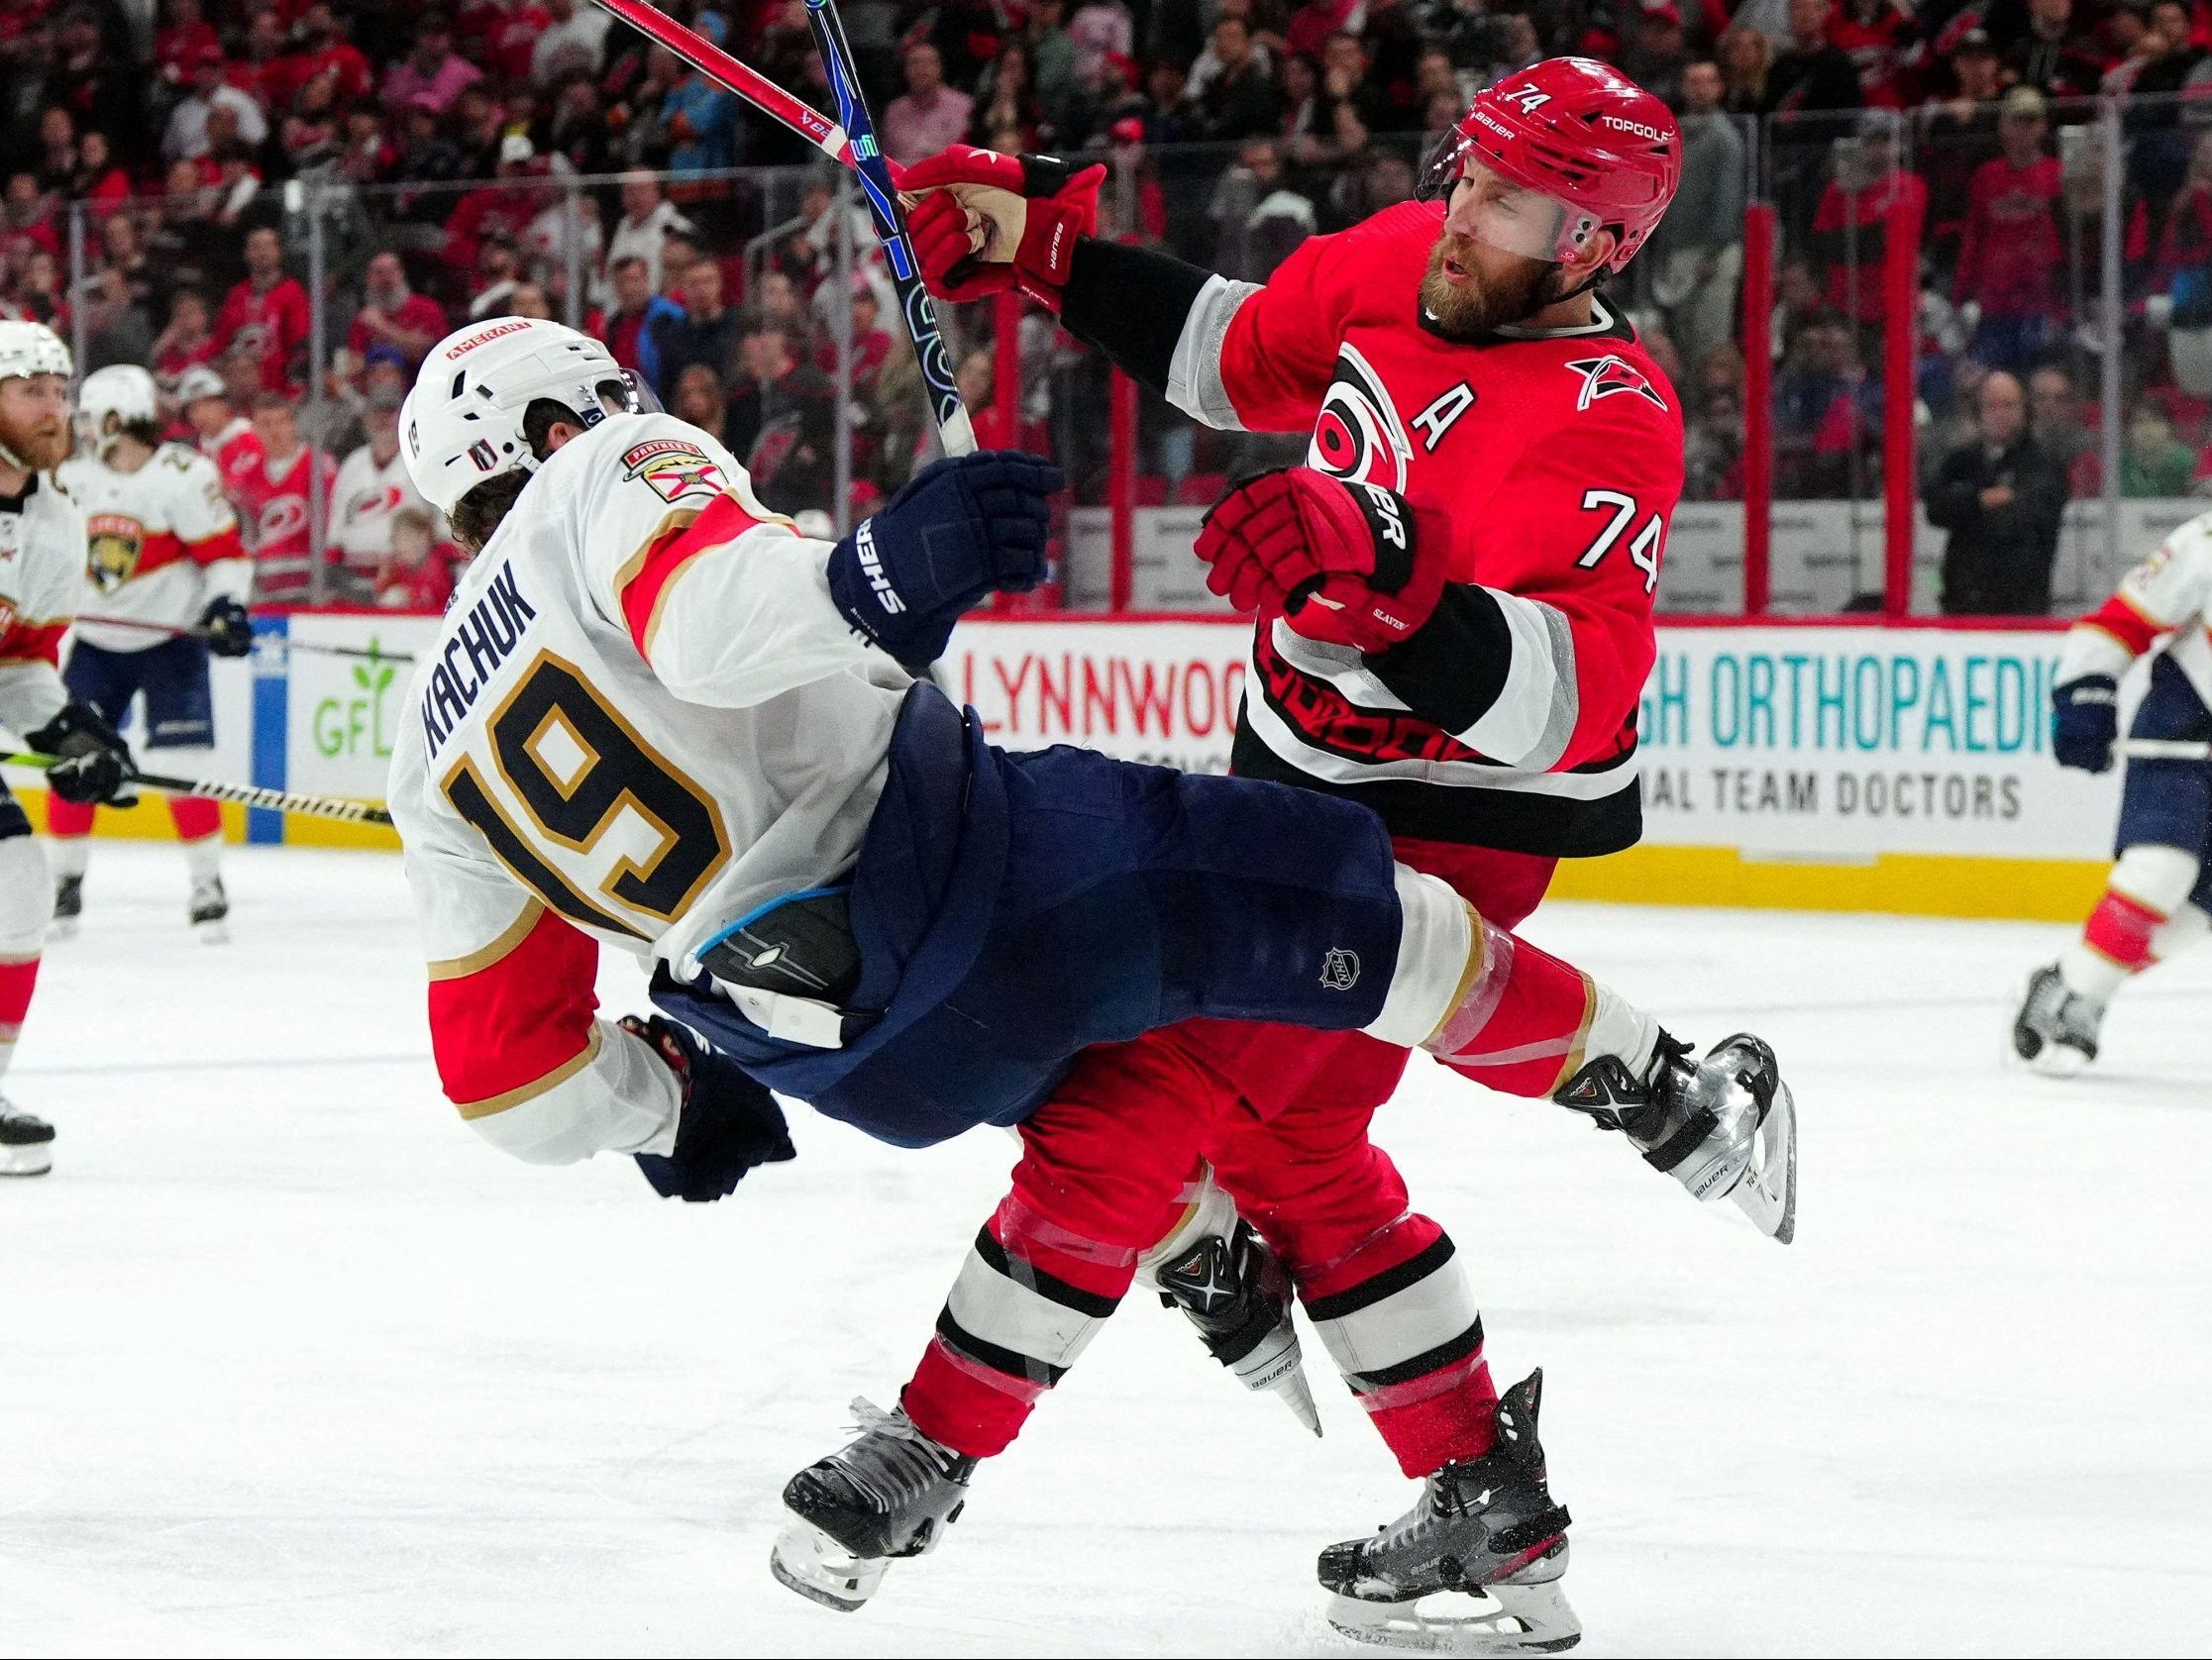 Florida Panthers Outlast Carolina Hurricanes 3-2 in 6th-Longest